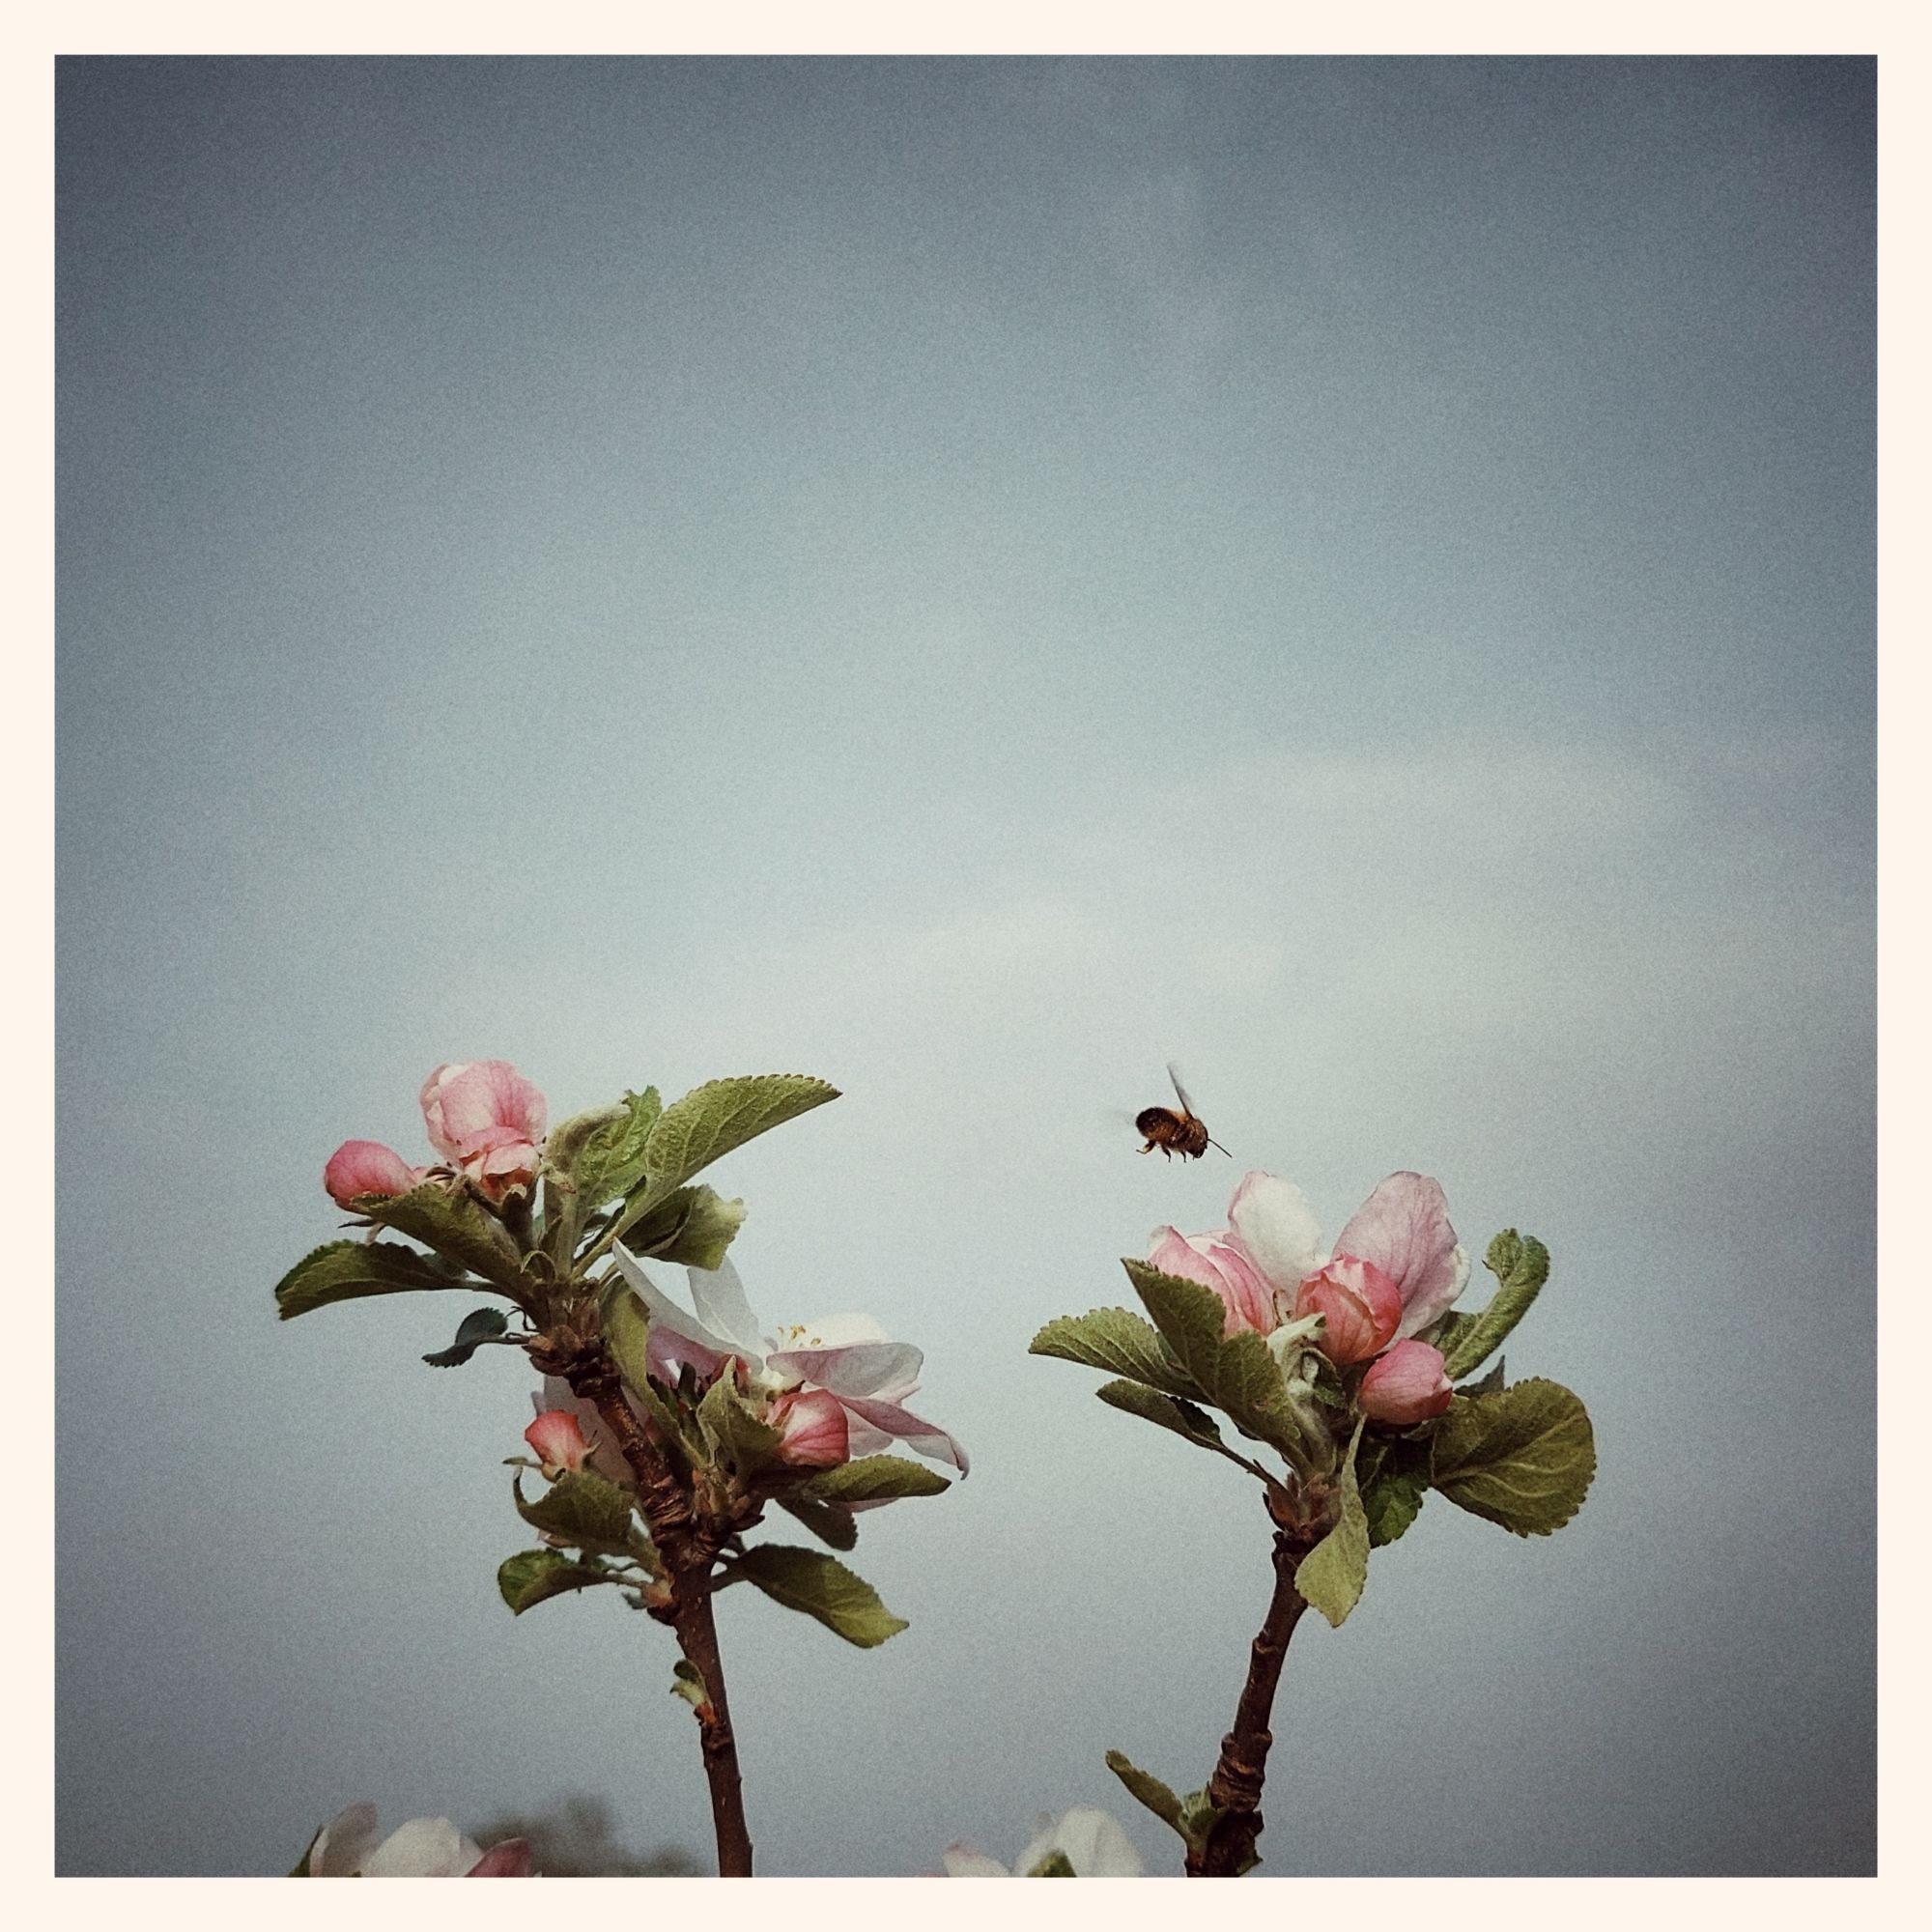 Dusty quiet skies. Grey haze. Apple blossoms. And a bee taking course.